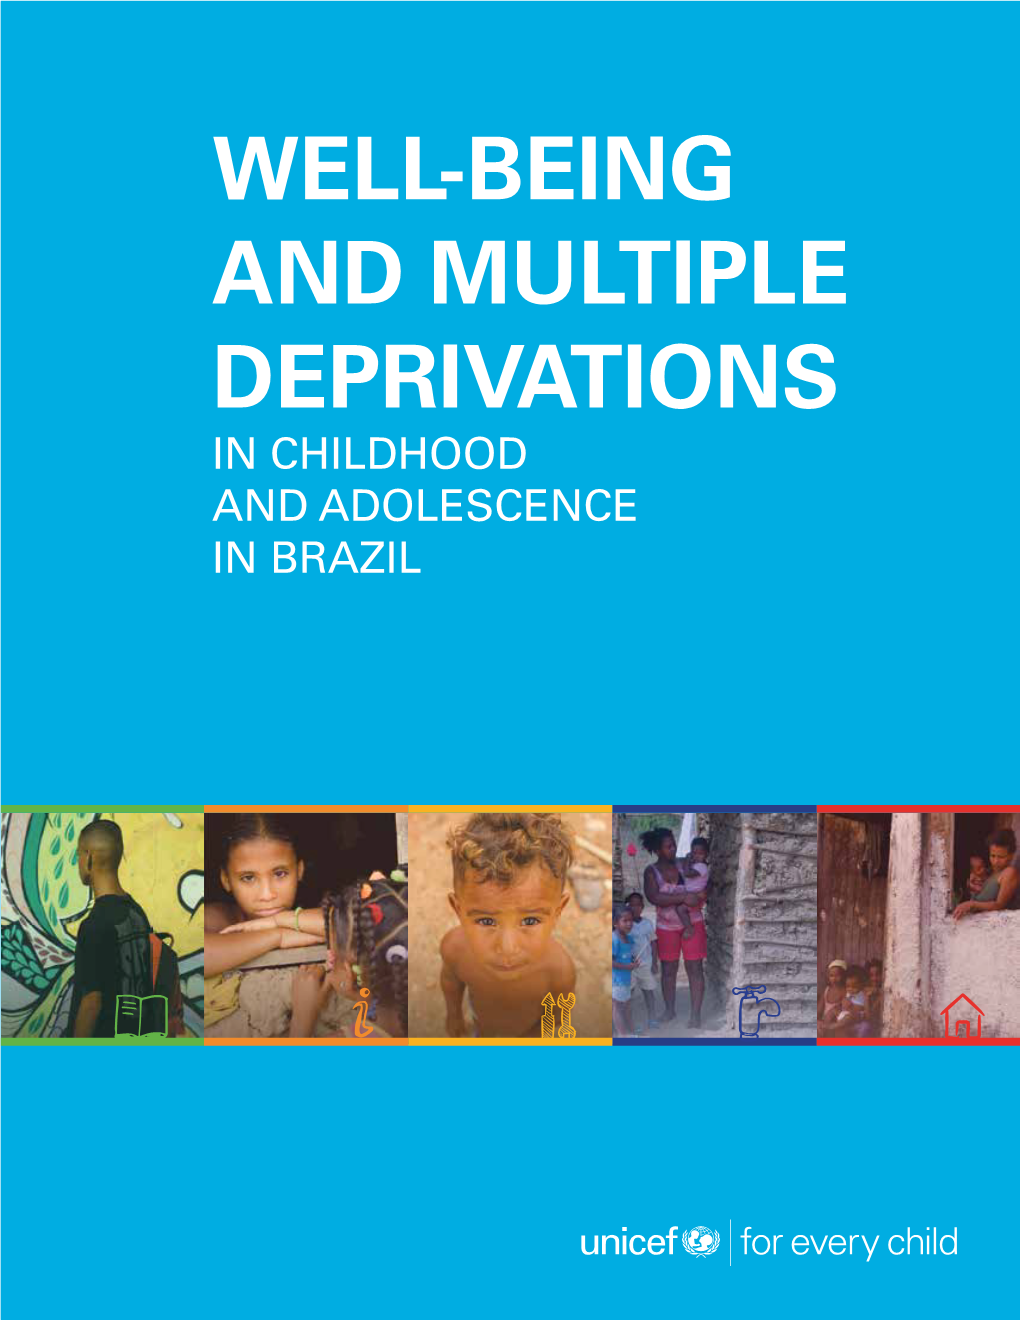 Well-Being and Multiple Deprivations in Childhood and Adolescence in Brazil